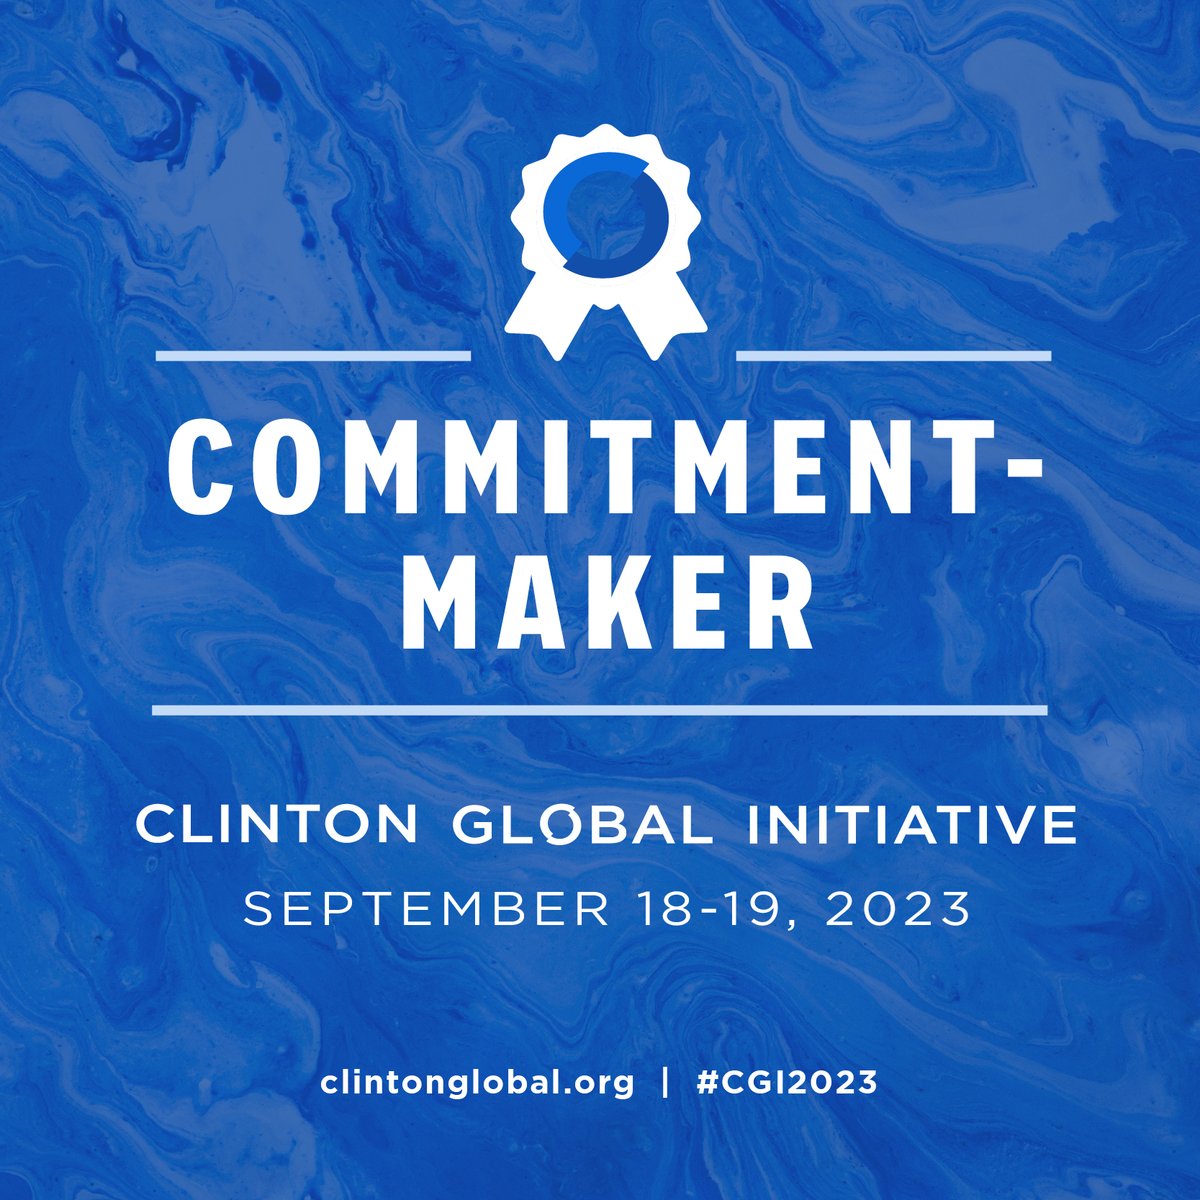 We’re making not one, but TWO Commitments to Action at #CGI2023 – join us next week as we announce alongside hundreds of other changemakers: clintonglobal.org/2023 @ClintonGlobal